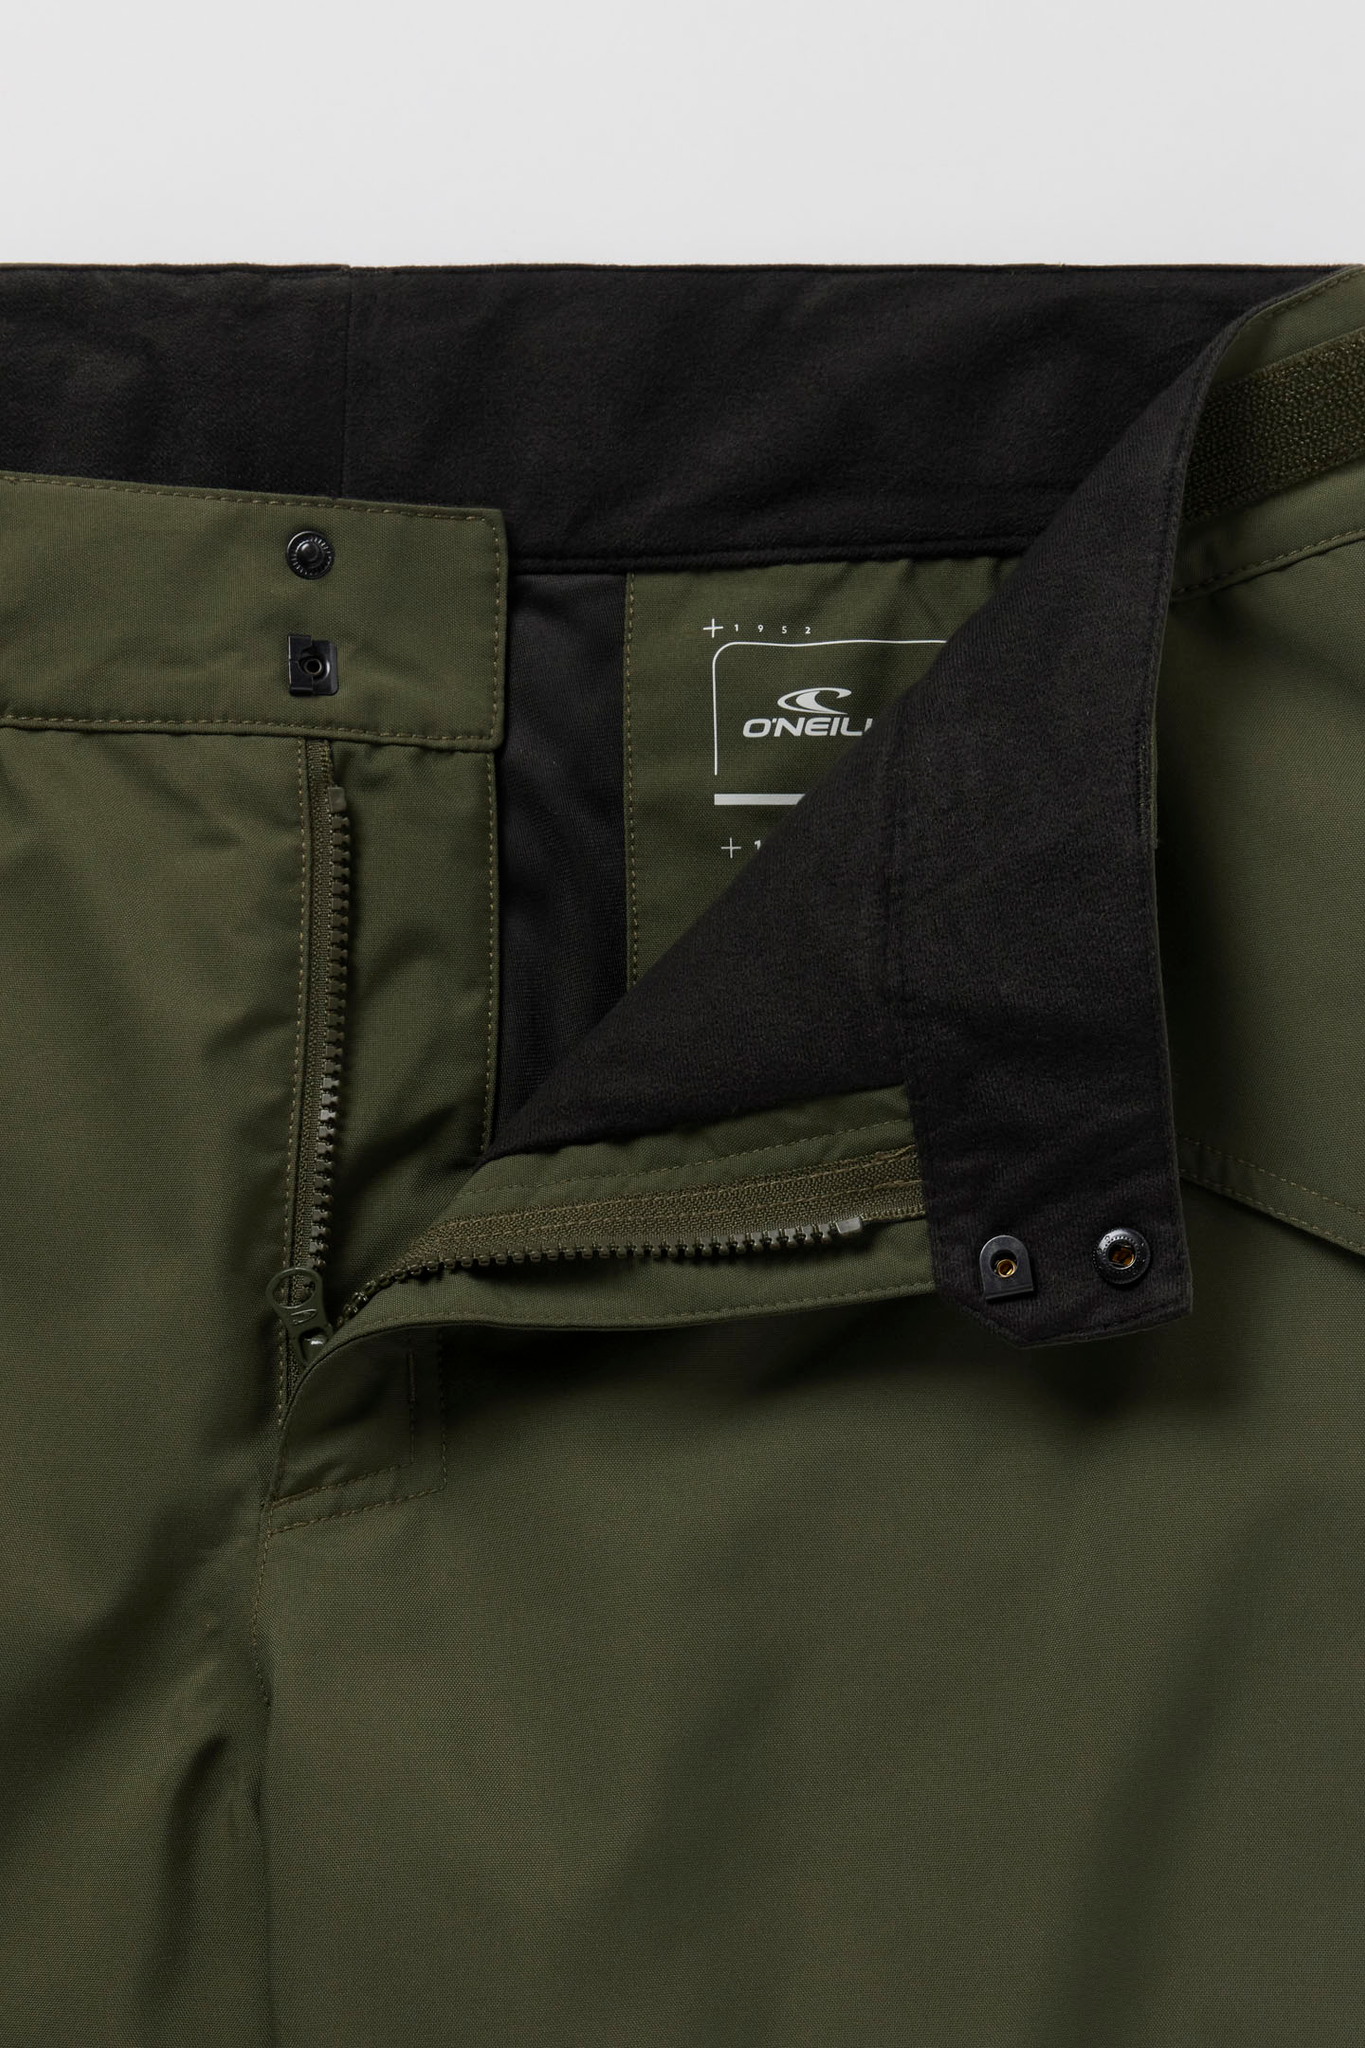 Hammer Insulated Pants - Forst Nght | O'Neill